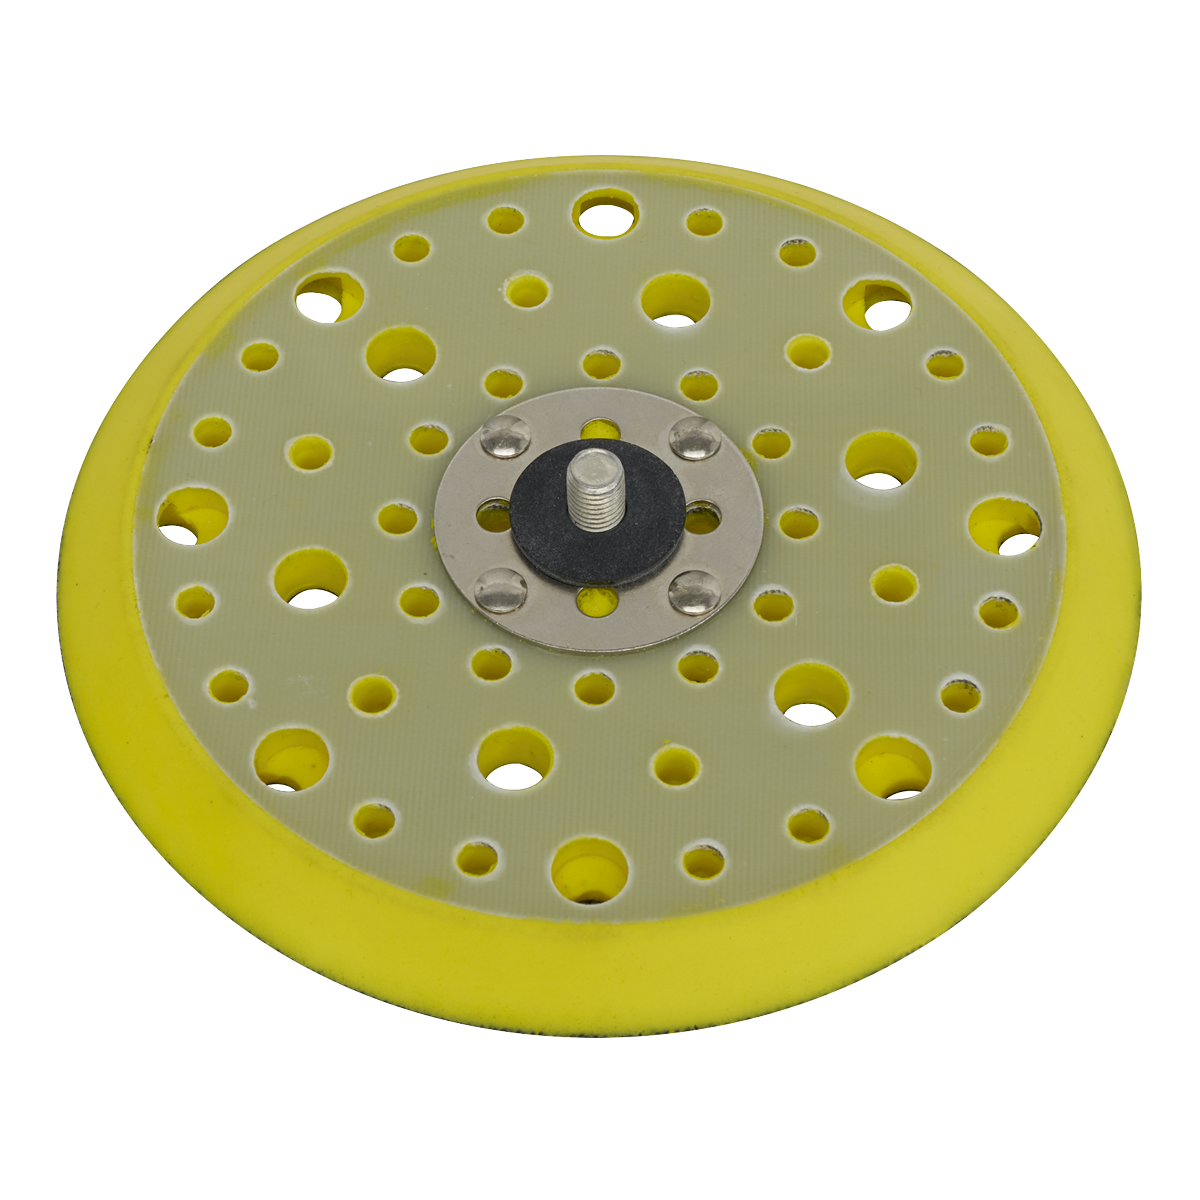 Sealey DA Dust-Free Multi-Hole Backing Pad for Hook-and-Loop Discs Ø150mm 5/16"UNF